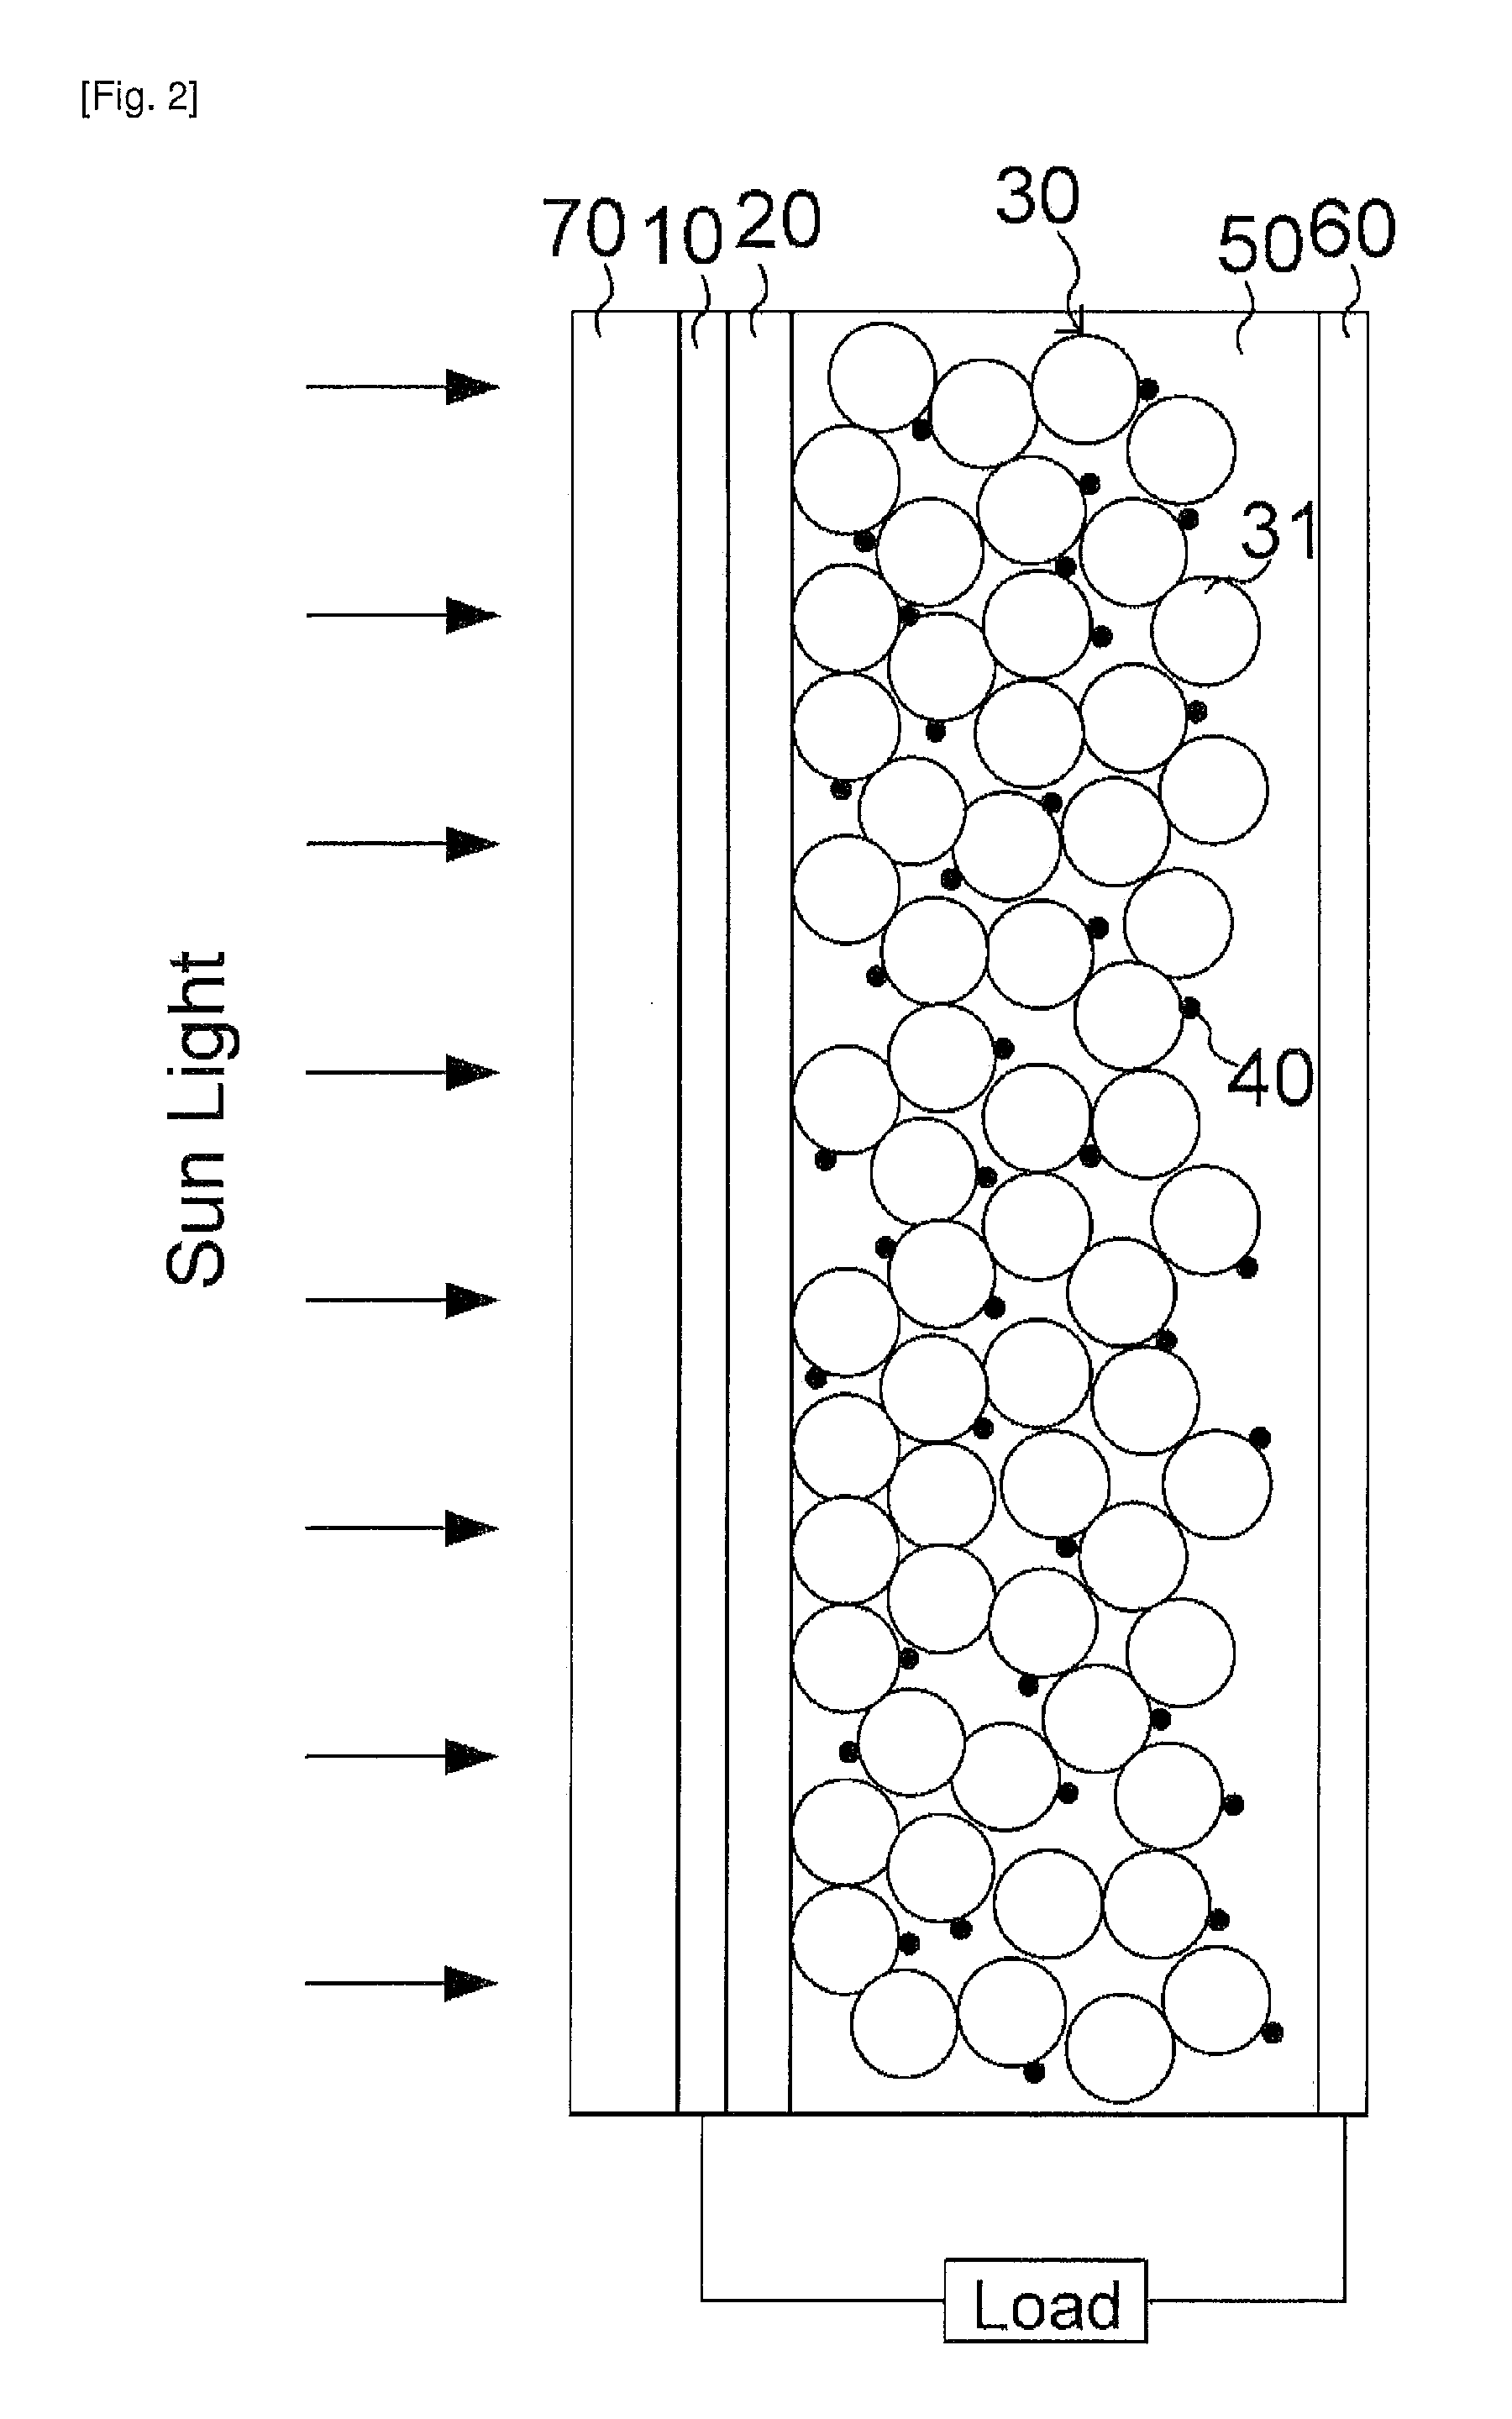 Method for Manufacturing a Nanostructured Inorganic/Organic Heterojunction Solar Cell